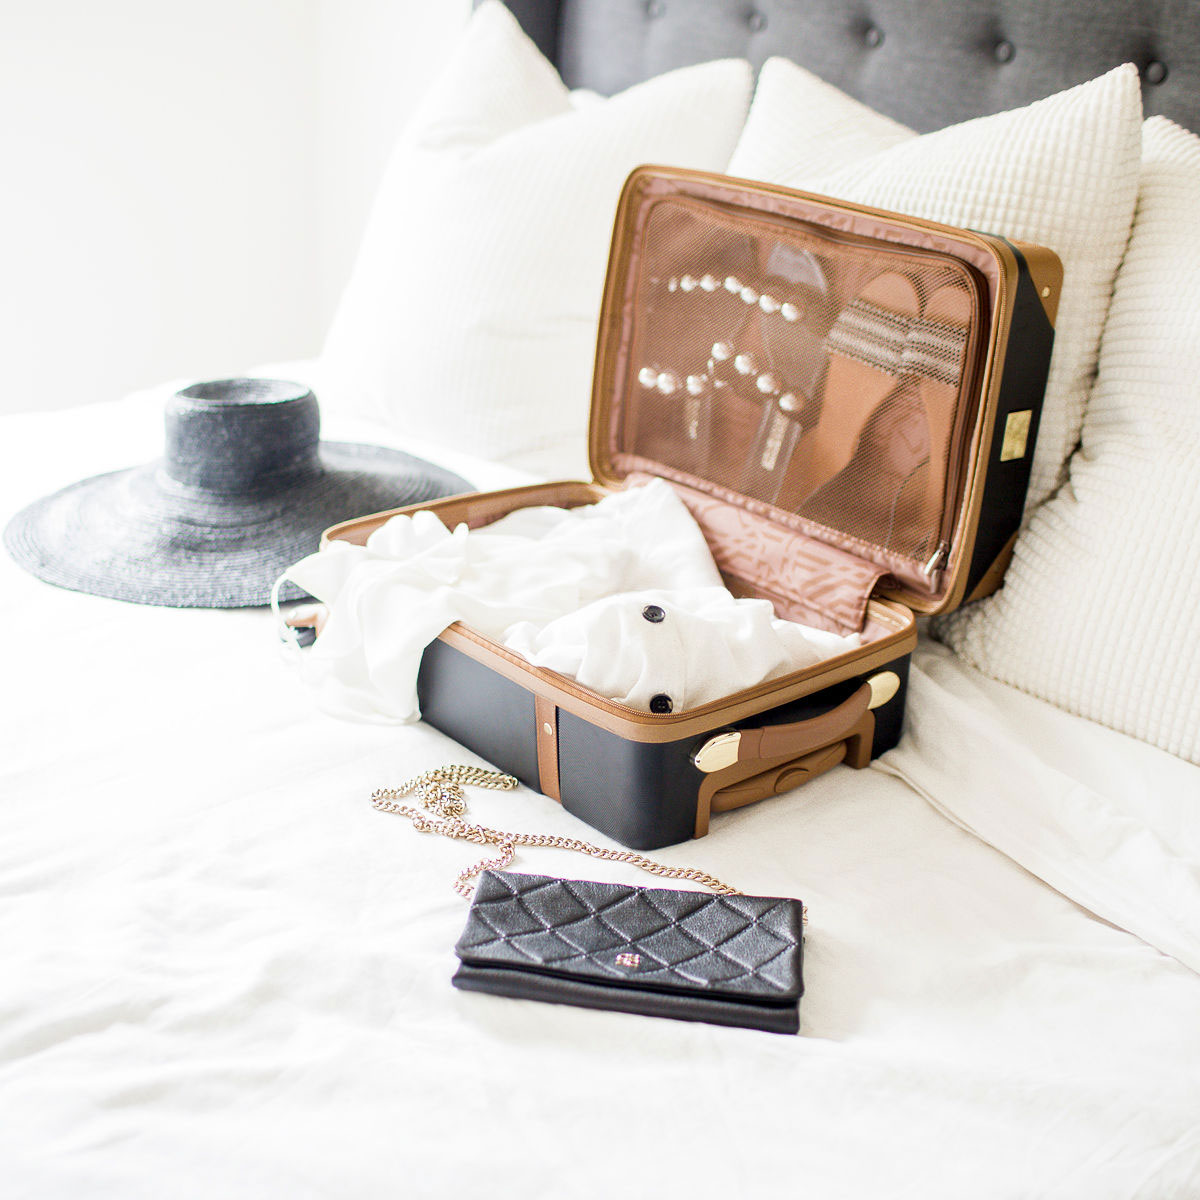 The Awkward Girl's Guide to Packing a Suitcase